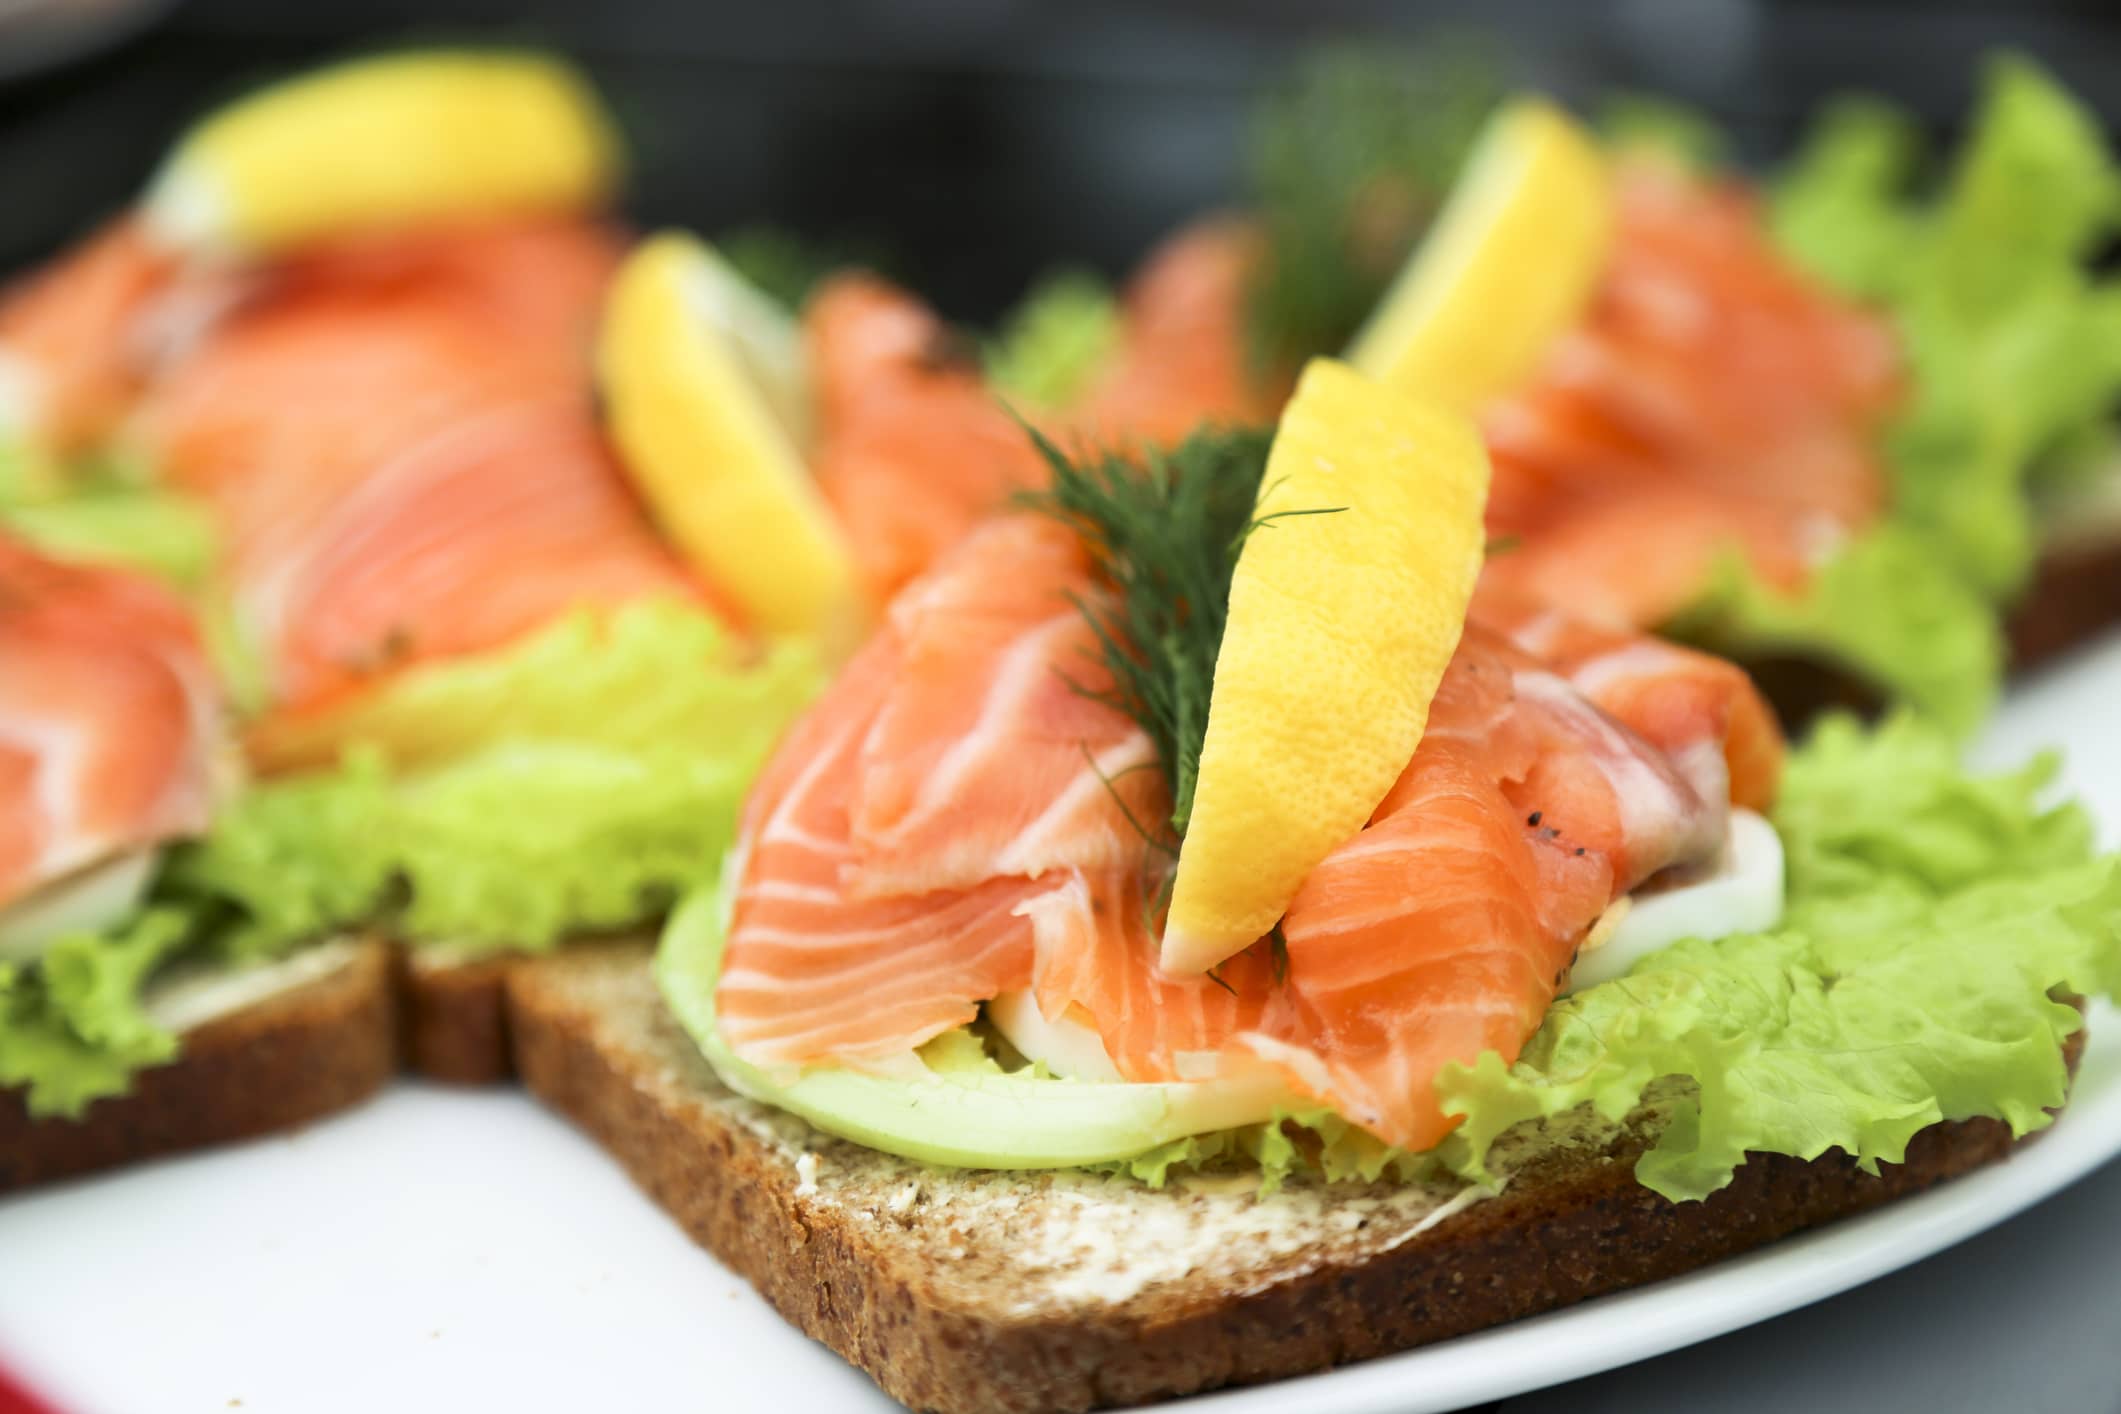 Eating a diet high in Omega 3s is essential for brain health